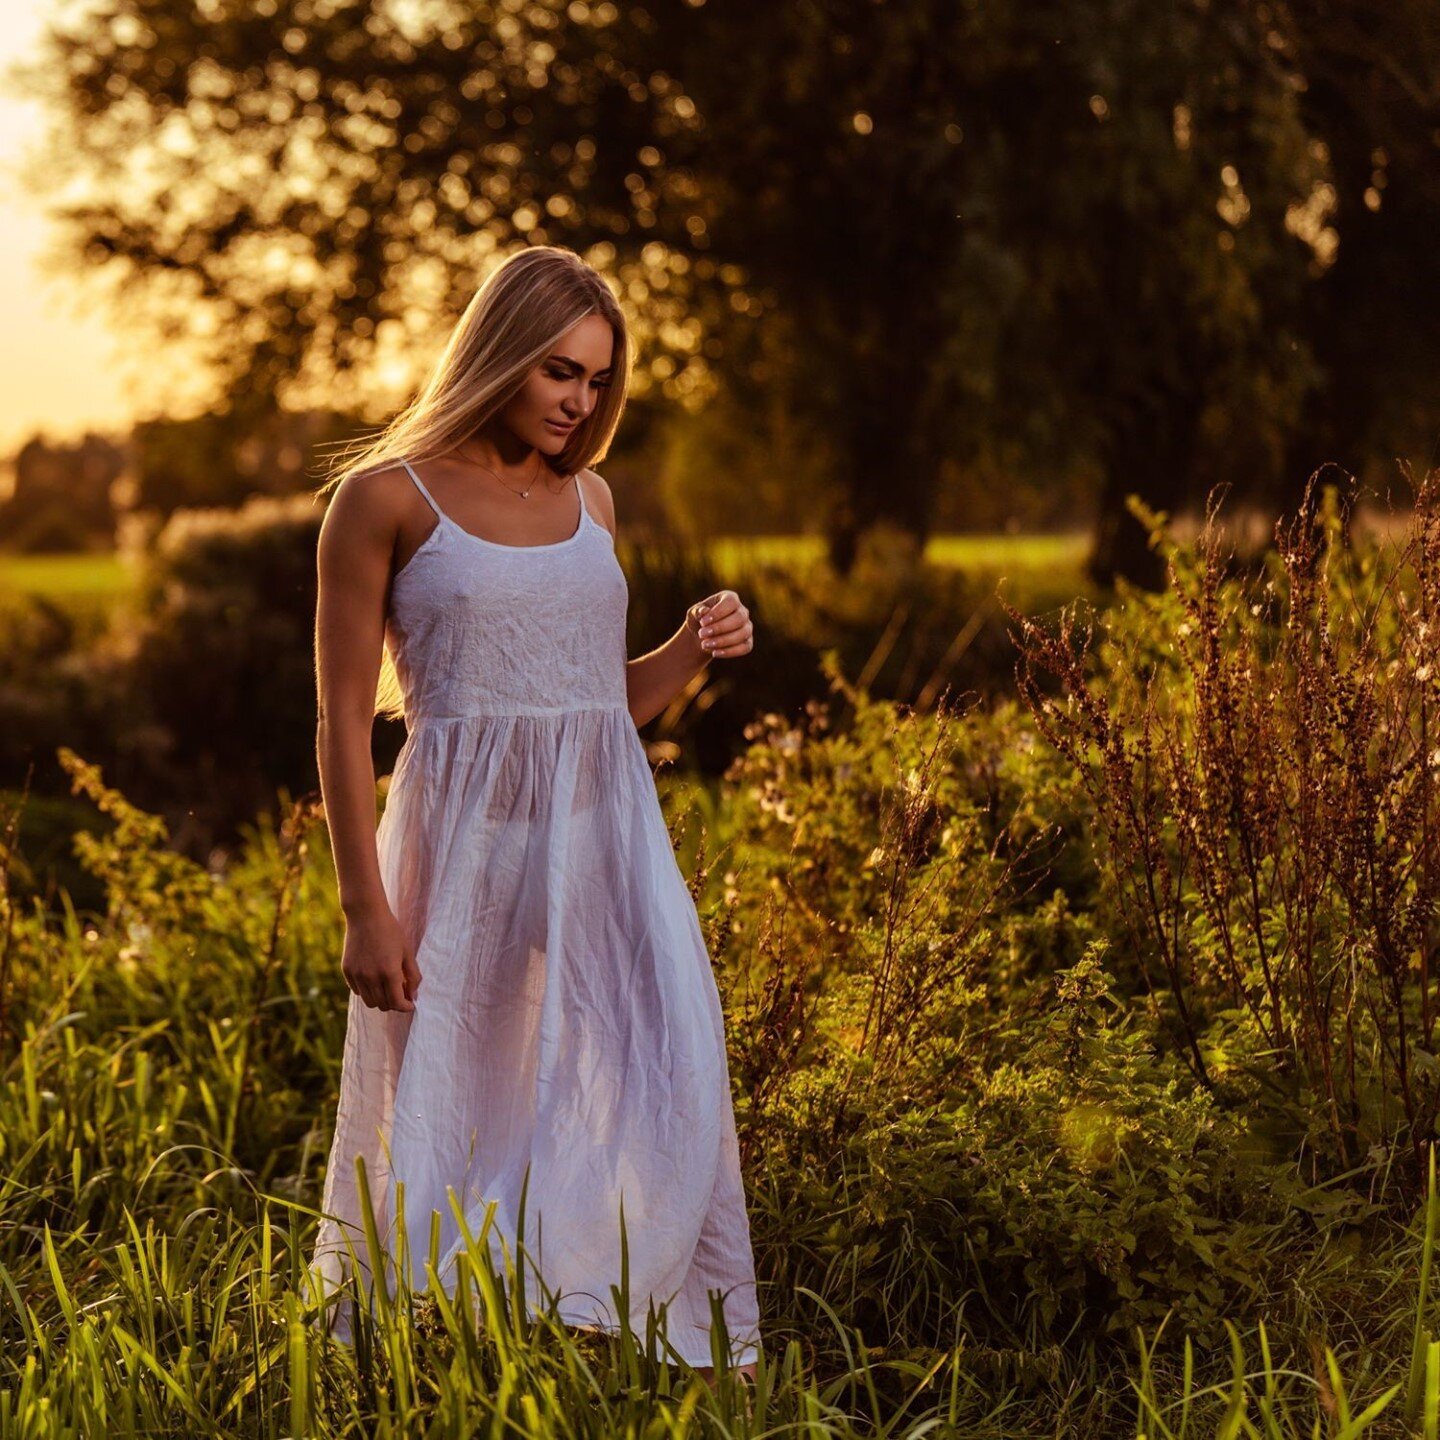 Summer evening - riverside with Maddie⁣
⁣
⁣
_____⁣
⁣
#beauty #romanticphoto #lifestyle⁣
#instabeauty #naturallightphotography